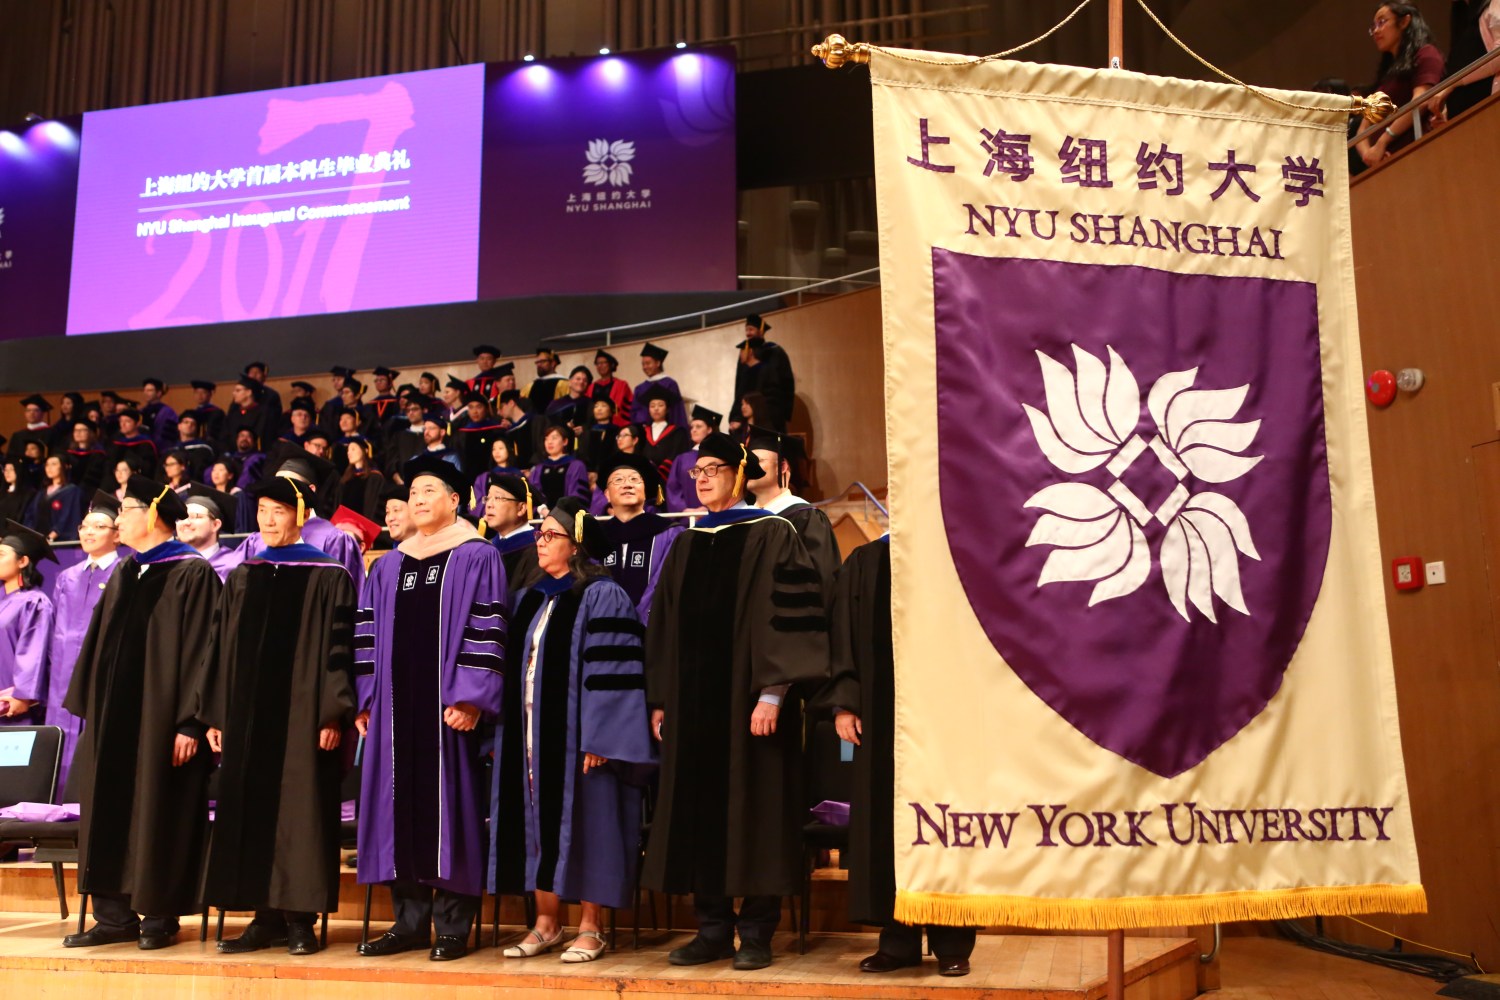 Chancellors, guests and graduates attend the first graduation ceremony of NYU Shanghai, the first Sino-US joint research university, in Shanghai, China, 28 May 2017.On May 28th, the pioneering class of 2017 at NYU Shanghai earned their NYU bachelor¡¯s degrees as well as their NYU Shanghai diplomas. The 264 graduates, who hail from China, the United States and 31 other countries, led the way into the hall of Shanghai¡¯s Oriental Arts Center packed with professors, friends, siblings and proud parents who travelled from around the world to celebrate the very first graduation of the first Sino-US joint research university. Chancellor Yu Lizhong and Vice Chancellor Jeff Lehman offered the commencement remarks. Yu asked the graduates to carry forward NYU Shanghai¡¯s academic values of independent thinking, innovation and creativity as well as its spirit of openness and inclusiveness to the advance of human beings and our society. On a day of many firsts for NYU Shanghai, both Chancellors also awarded the university¡¯s newly minted Medal of Honor to two prominent figures, China¡¯s former ambassador to the United States, Zhou Wenzhong, and real estate developer, Wang Shi. Both made brief congratulatory remarks to the graduating students, their families and dignitaries in attendance.No Use China. No Use France.